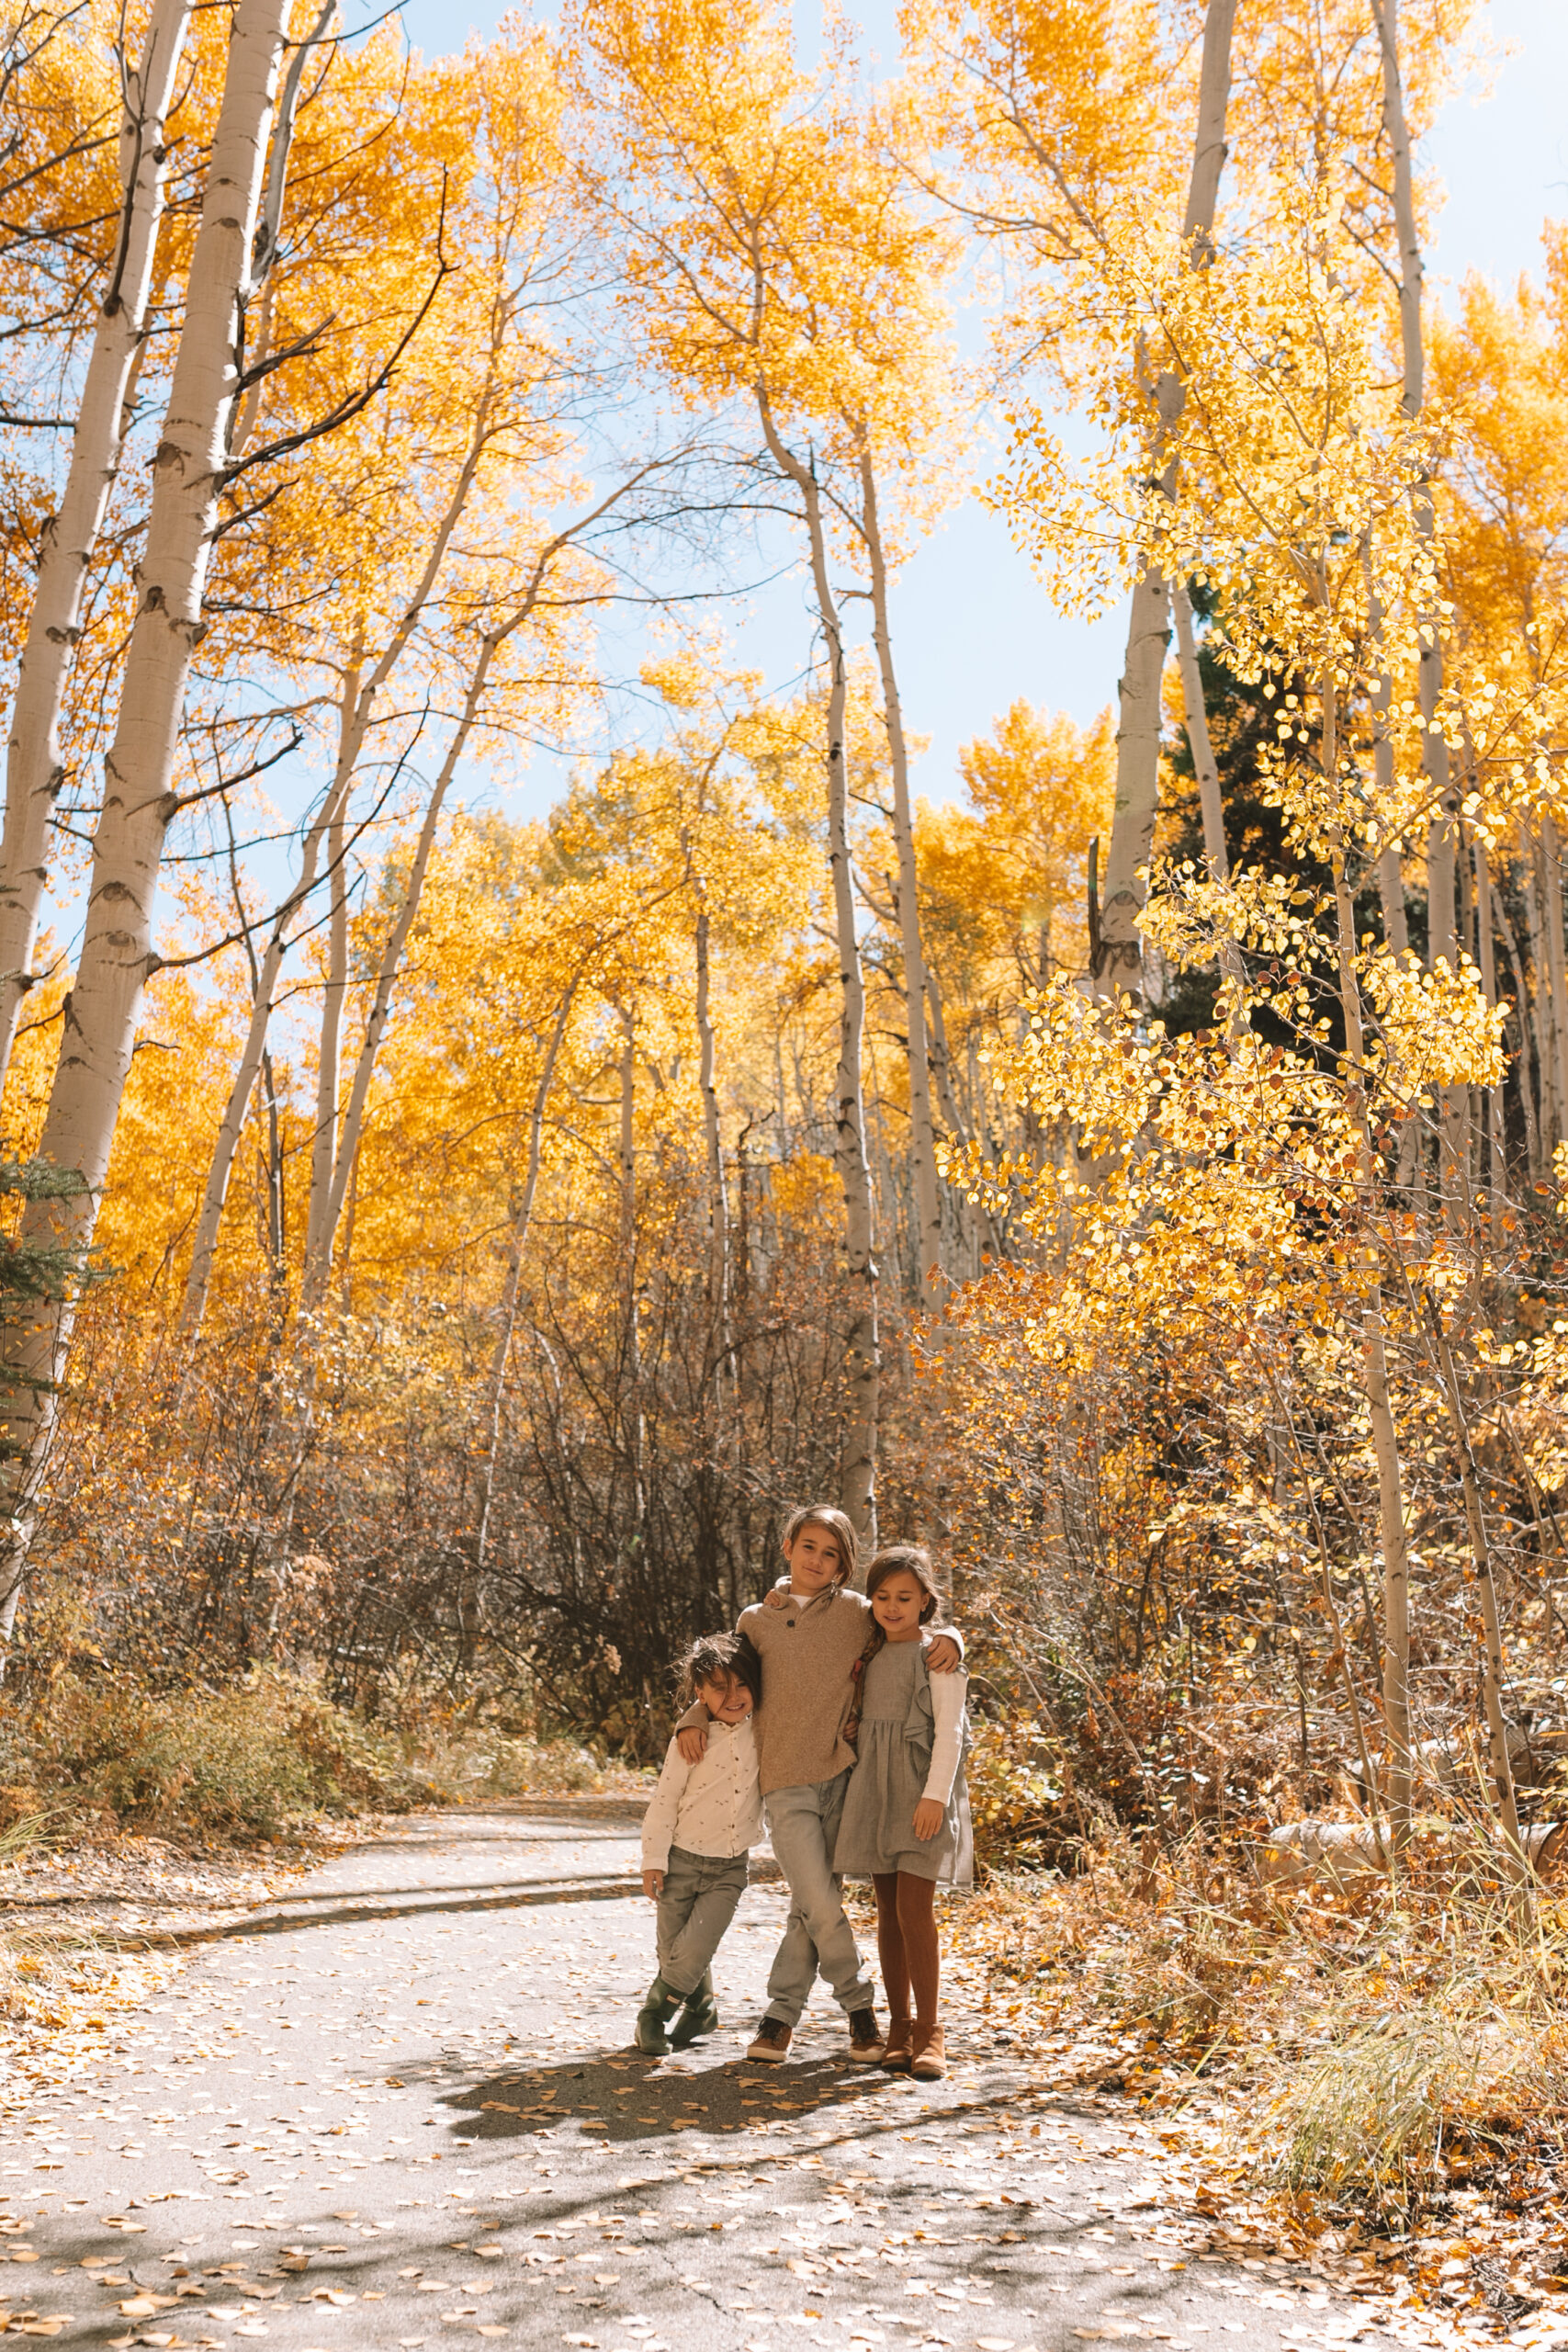 the most beautiful fall leaves on the aspen trees in aspen, colorado #thelovedesignedlife #theldltravels #fallleaves